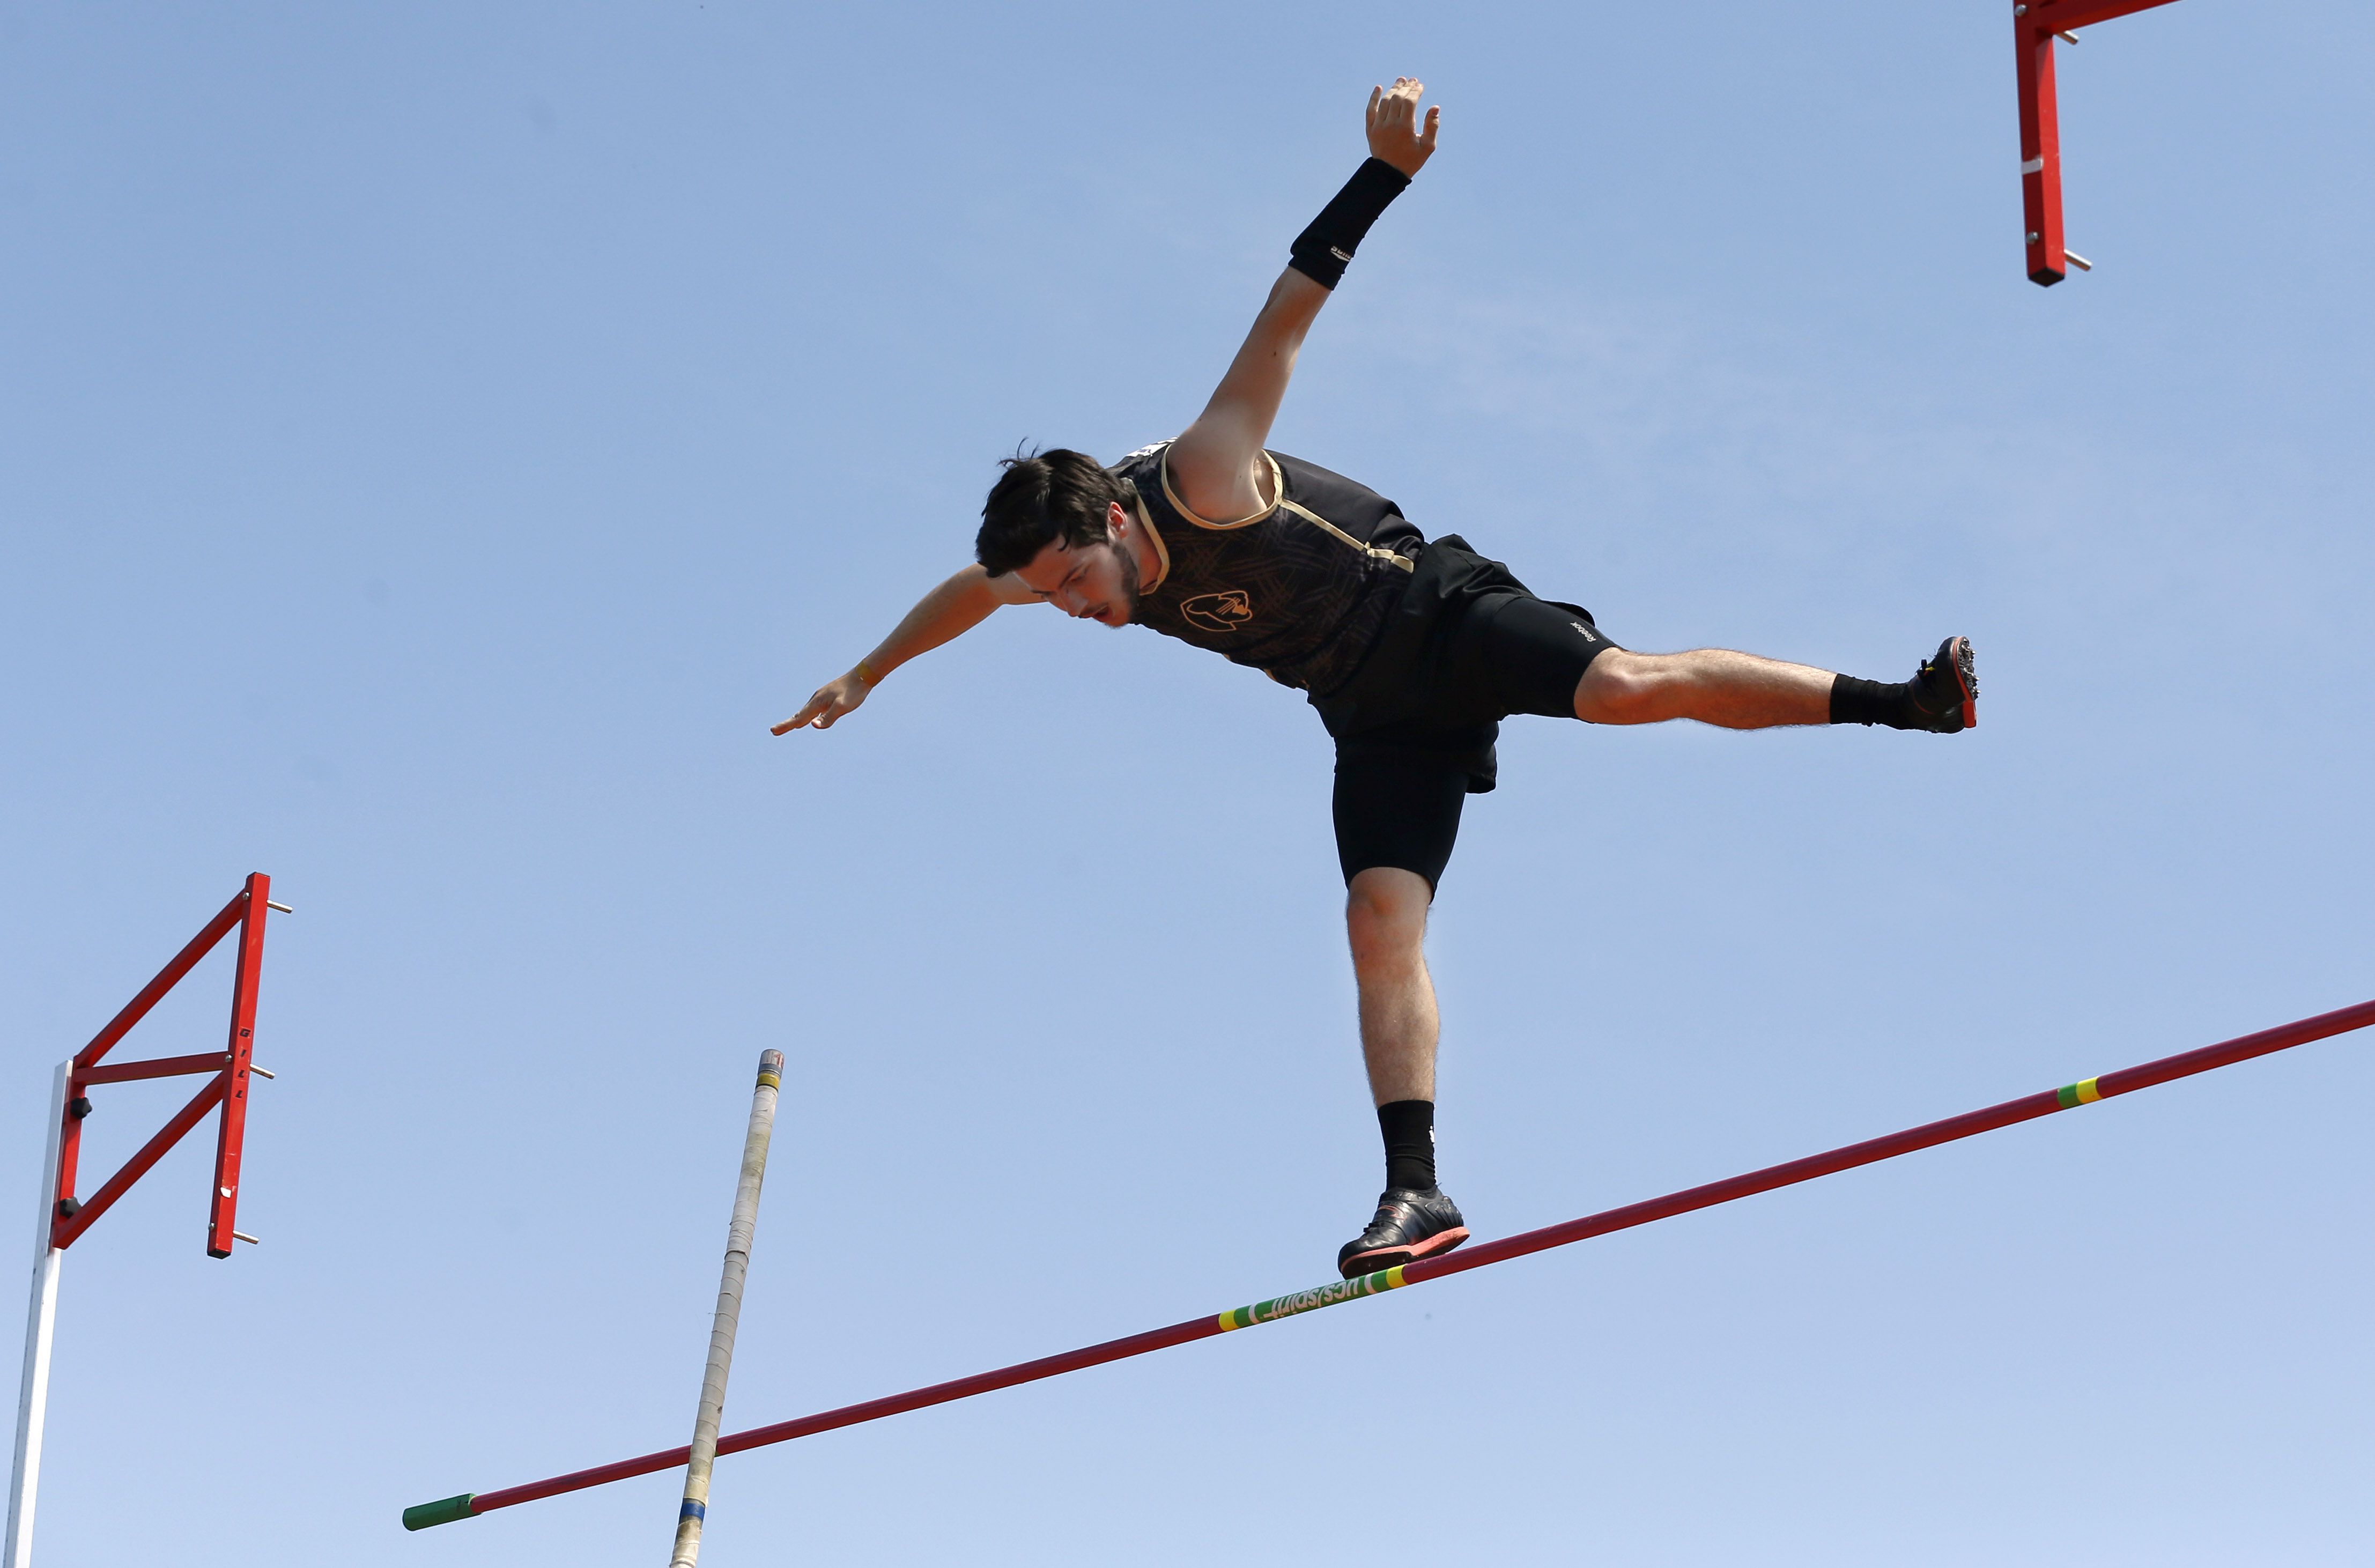 It takes a daredevil: Pole vaulting comes with all kinds of risks – some  even fatal. So why do athletes do it?